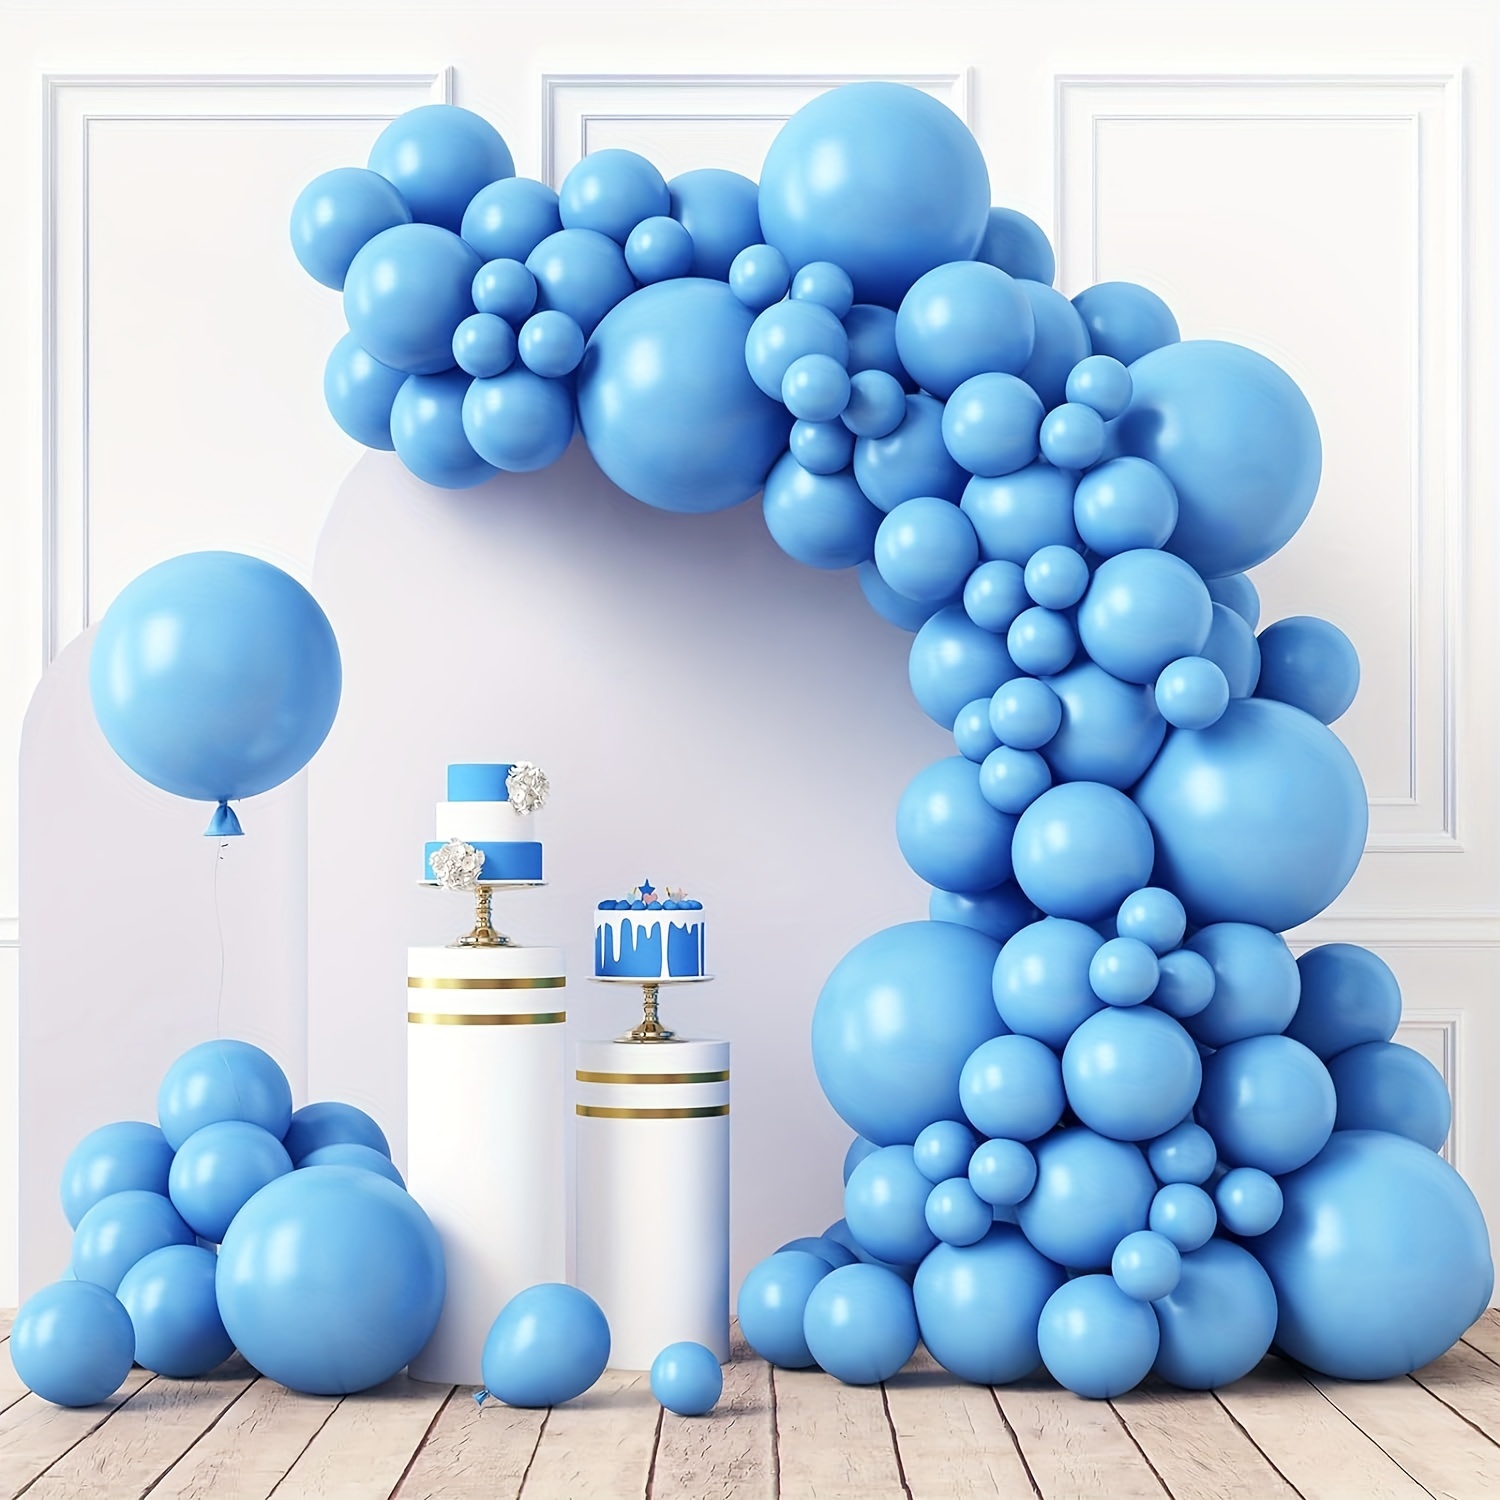 

110pcs/330pcs, Macaron Blue Balloon Set, Light Blue Balloons Different Sizes 18 12 10 5 Inches For Garland Arch, Sky Blue Balloons For Birthday Gender Reveal Wedding Party Decoration